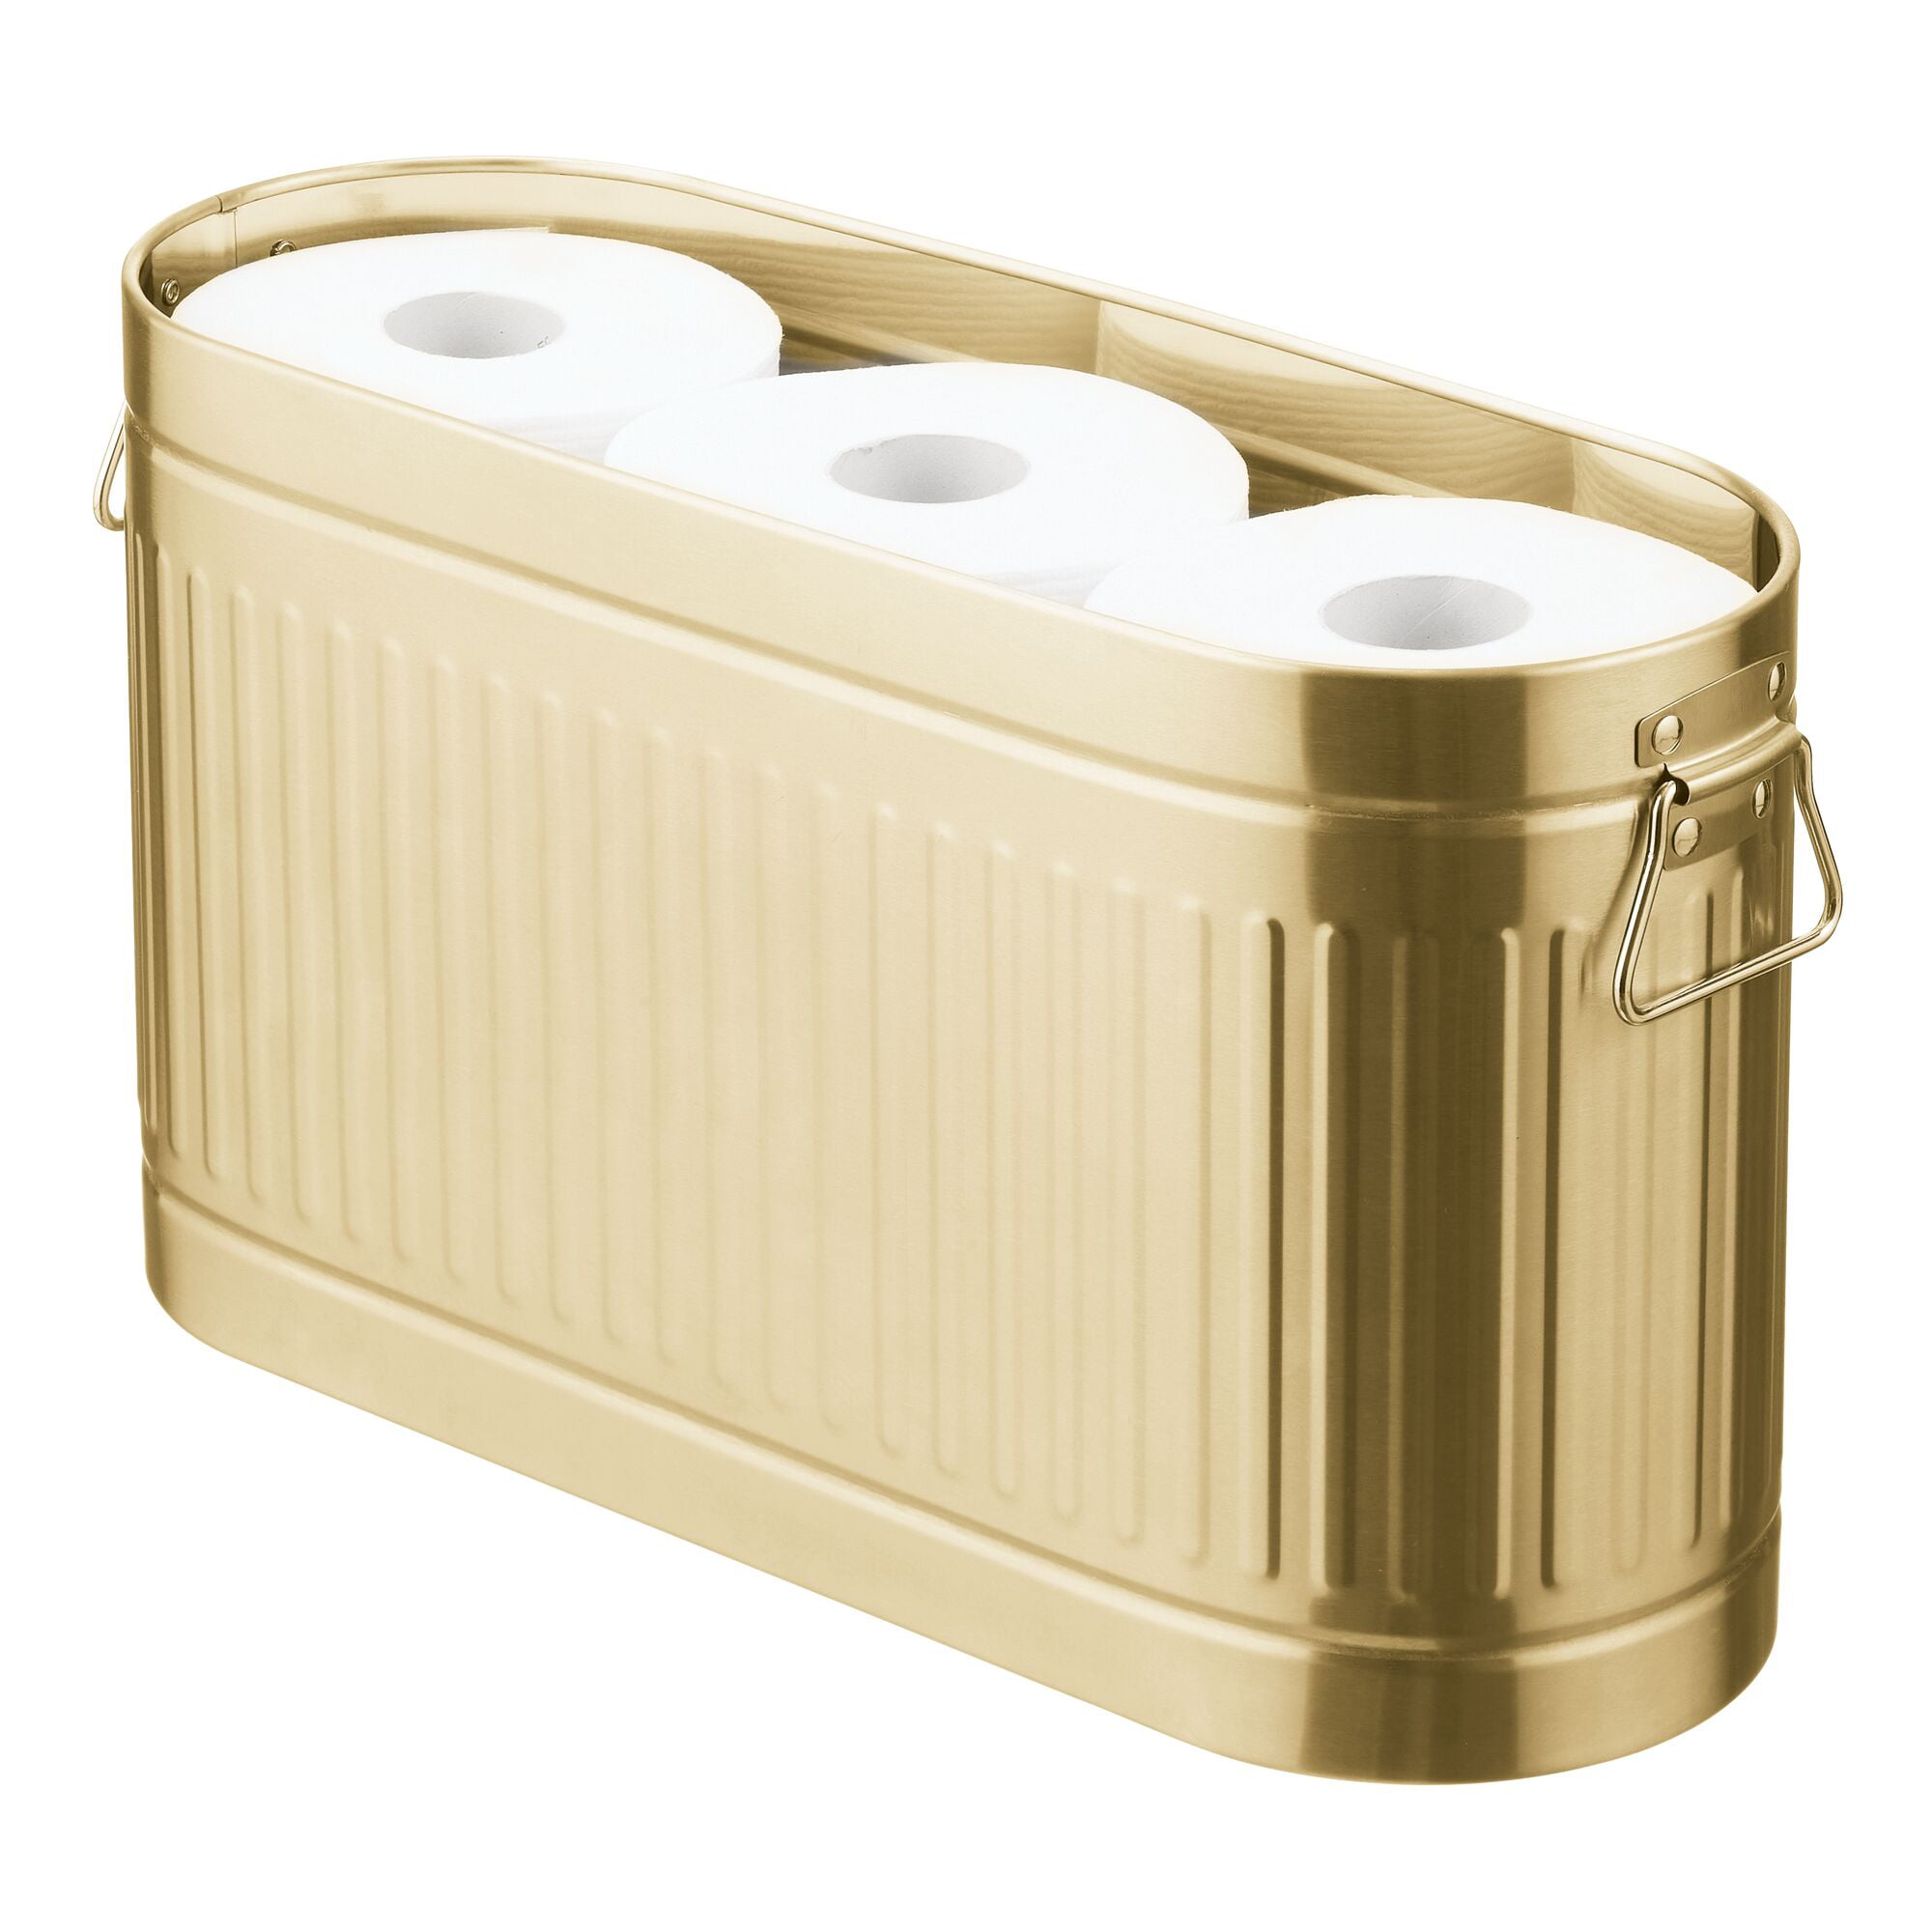 Holds Mega Rolls Container for Bathroom/Powder Rooms Bronze mDesign Retro Vintage Farmhouse Decorative Metal Toilet Paper Holder Stand with Large Capacity Storage for 6 Rolls of Toilet Tissue